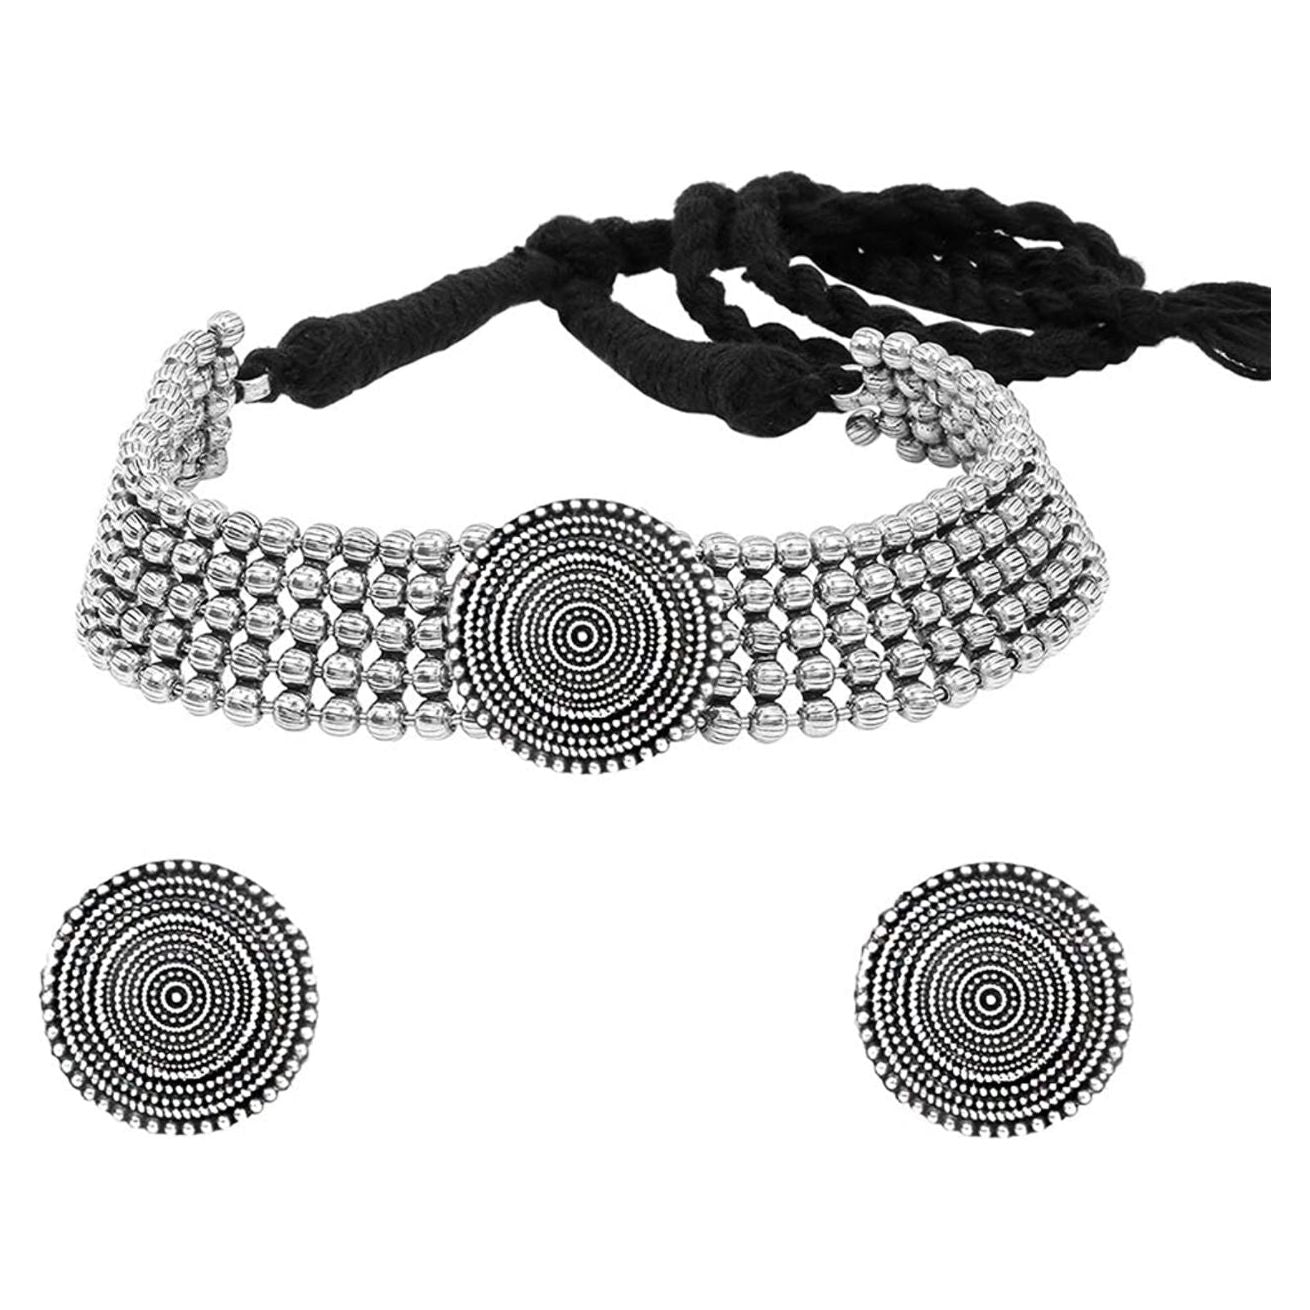 Choker necklace set with earrings